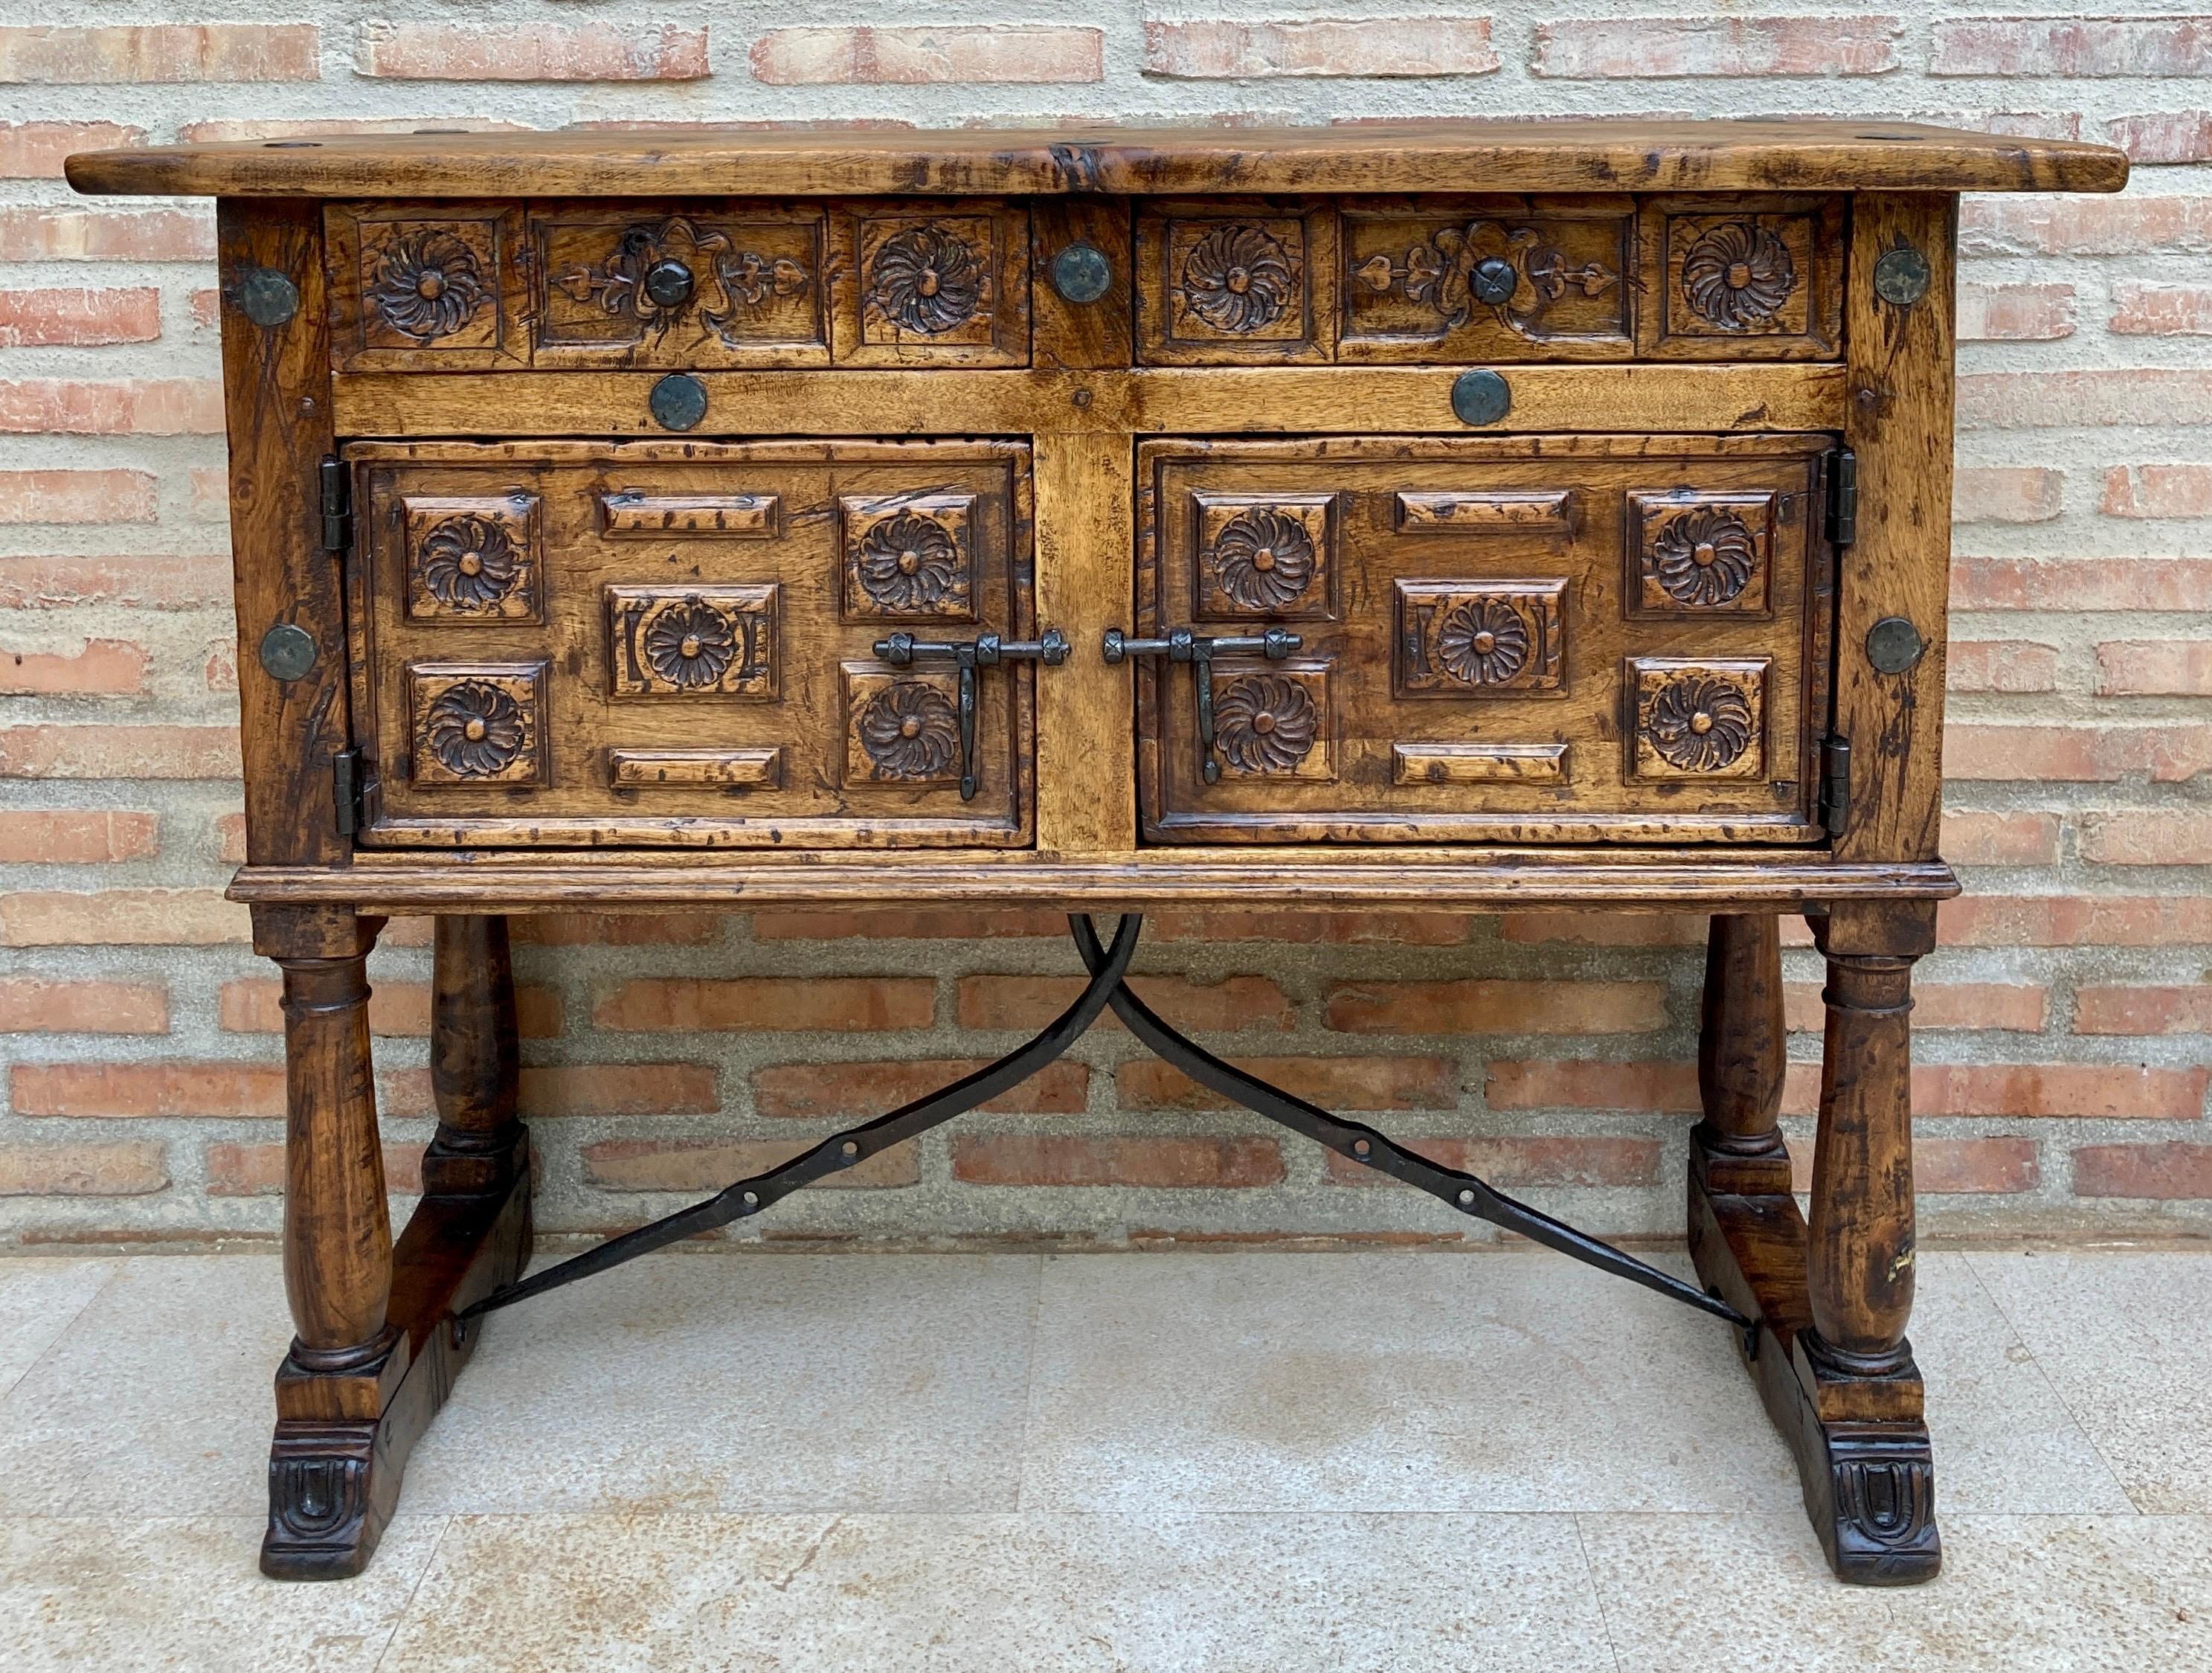 Antique 19th century Spanish console table in walnut with two drawers, a central door and original iron fittings. 
It can be used as a dresser or chest of drawers. 
This elegant console table was made in Spain, circa 1890. The four-legged sofa